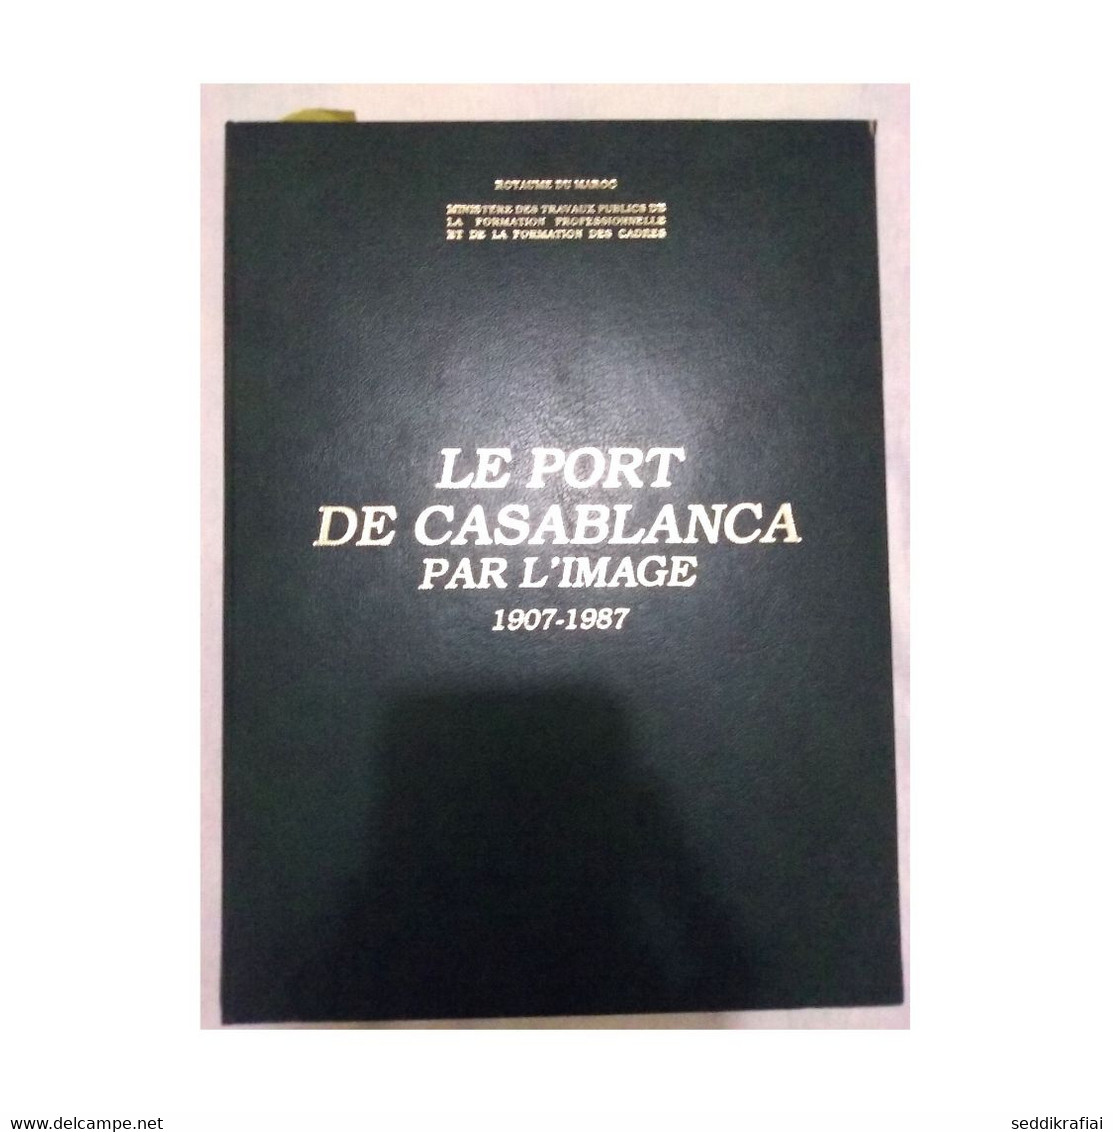 Vintage Morocco Book The Port Of Casablanca Binding Leather By The Image 1907-1987 Hassan 2 - Zeitschriften & Kataloge